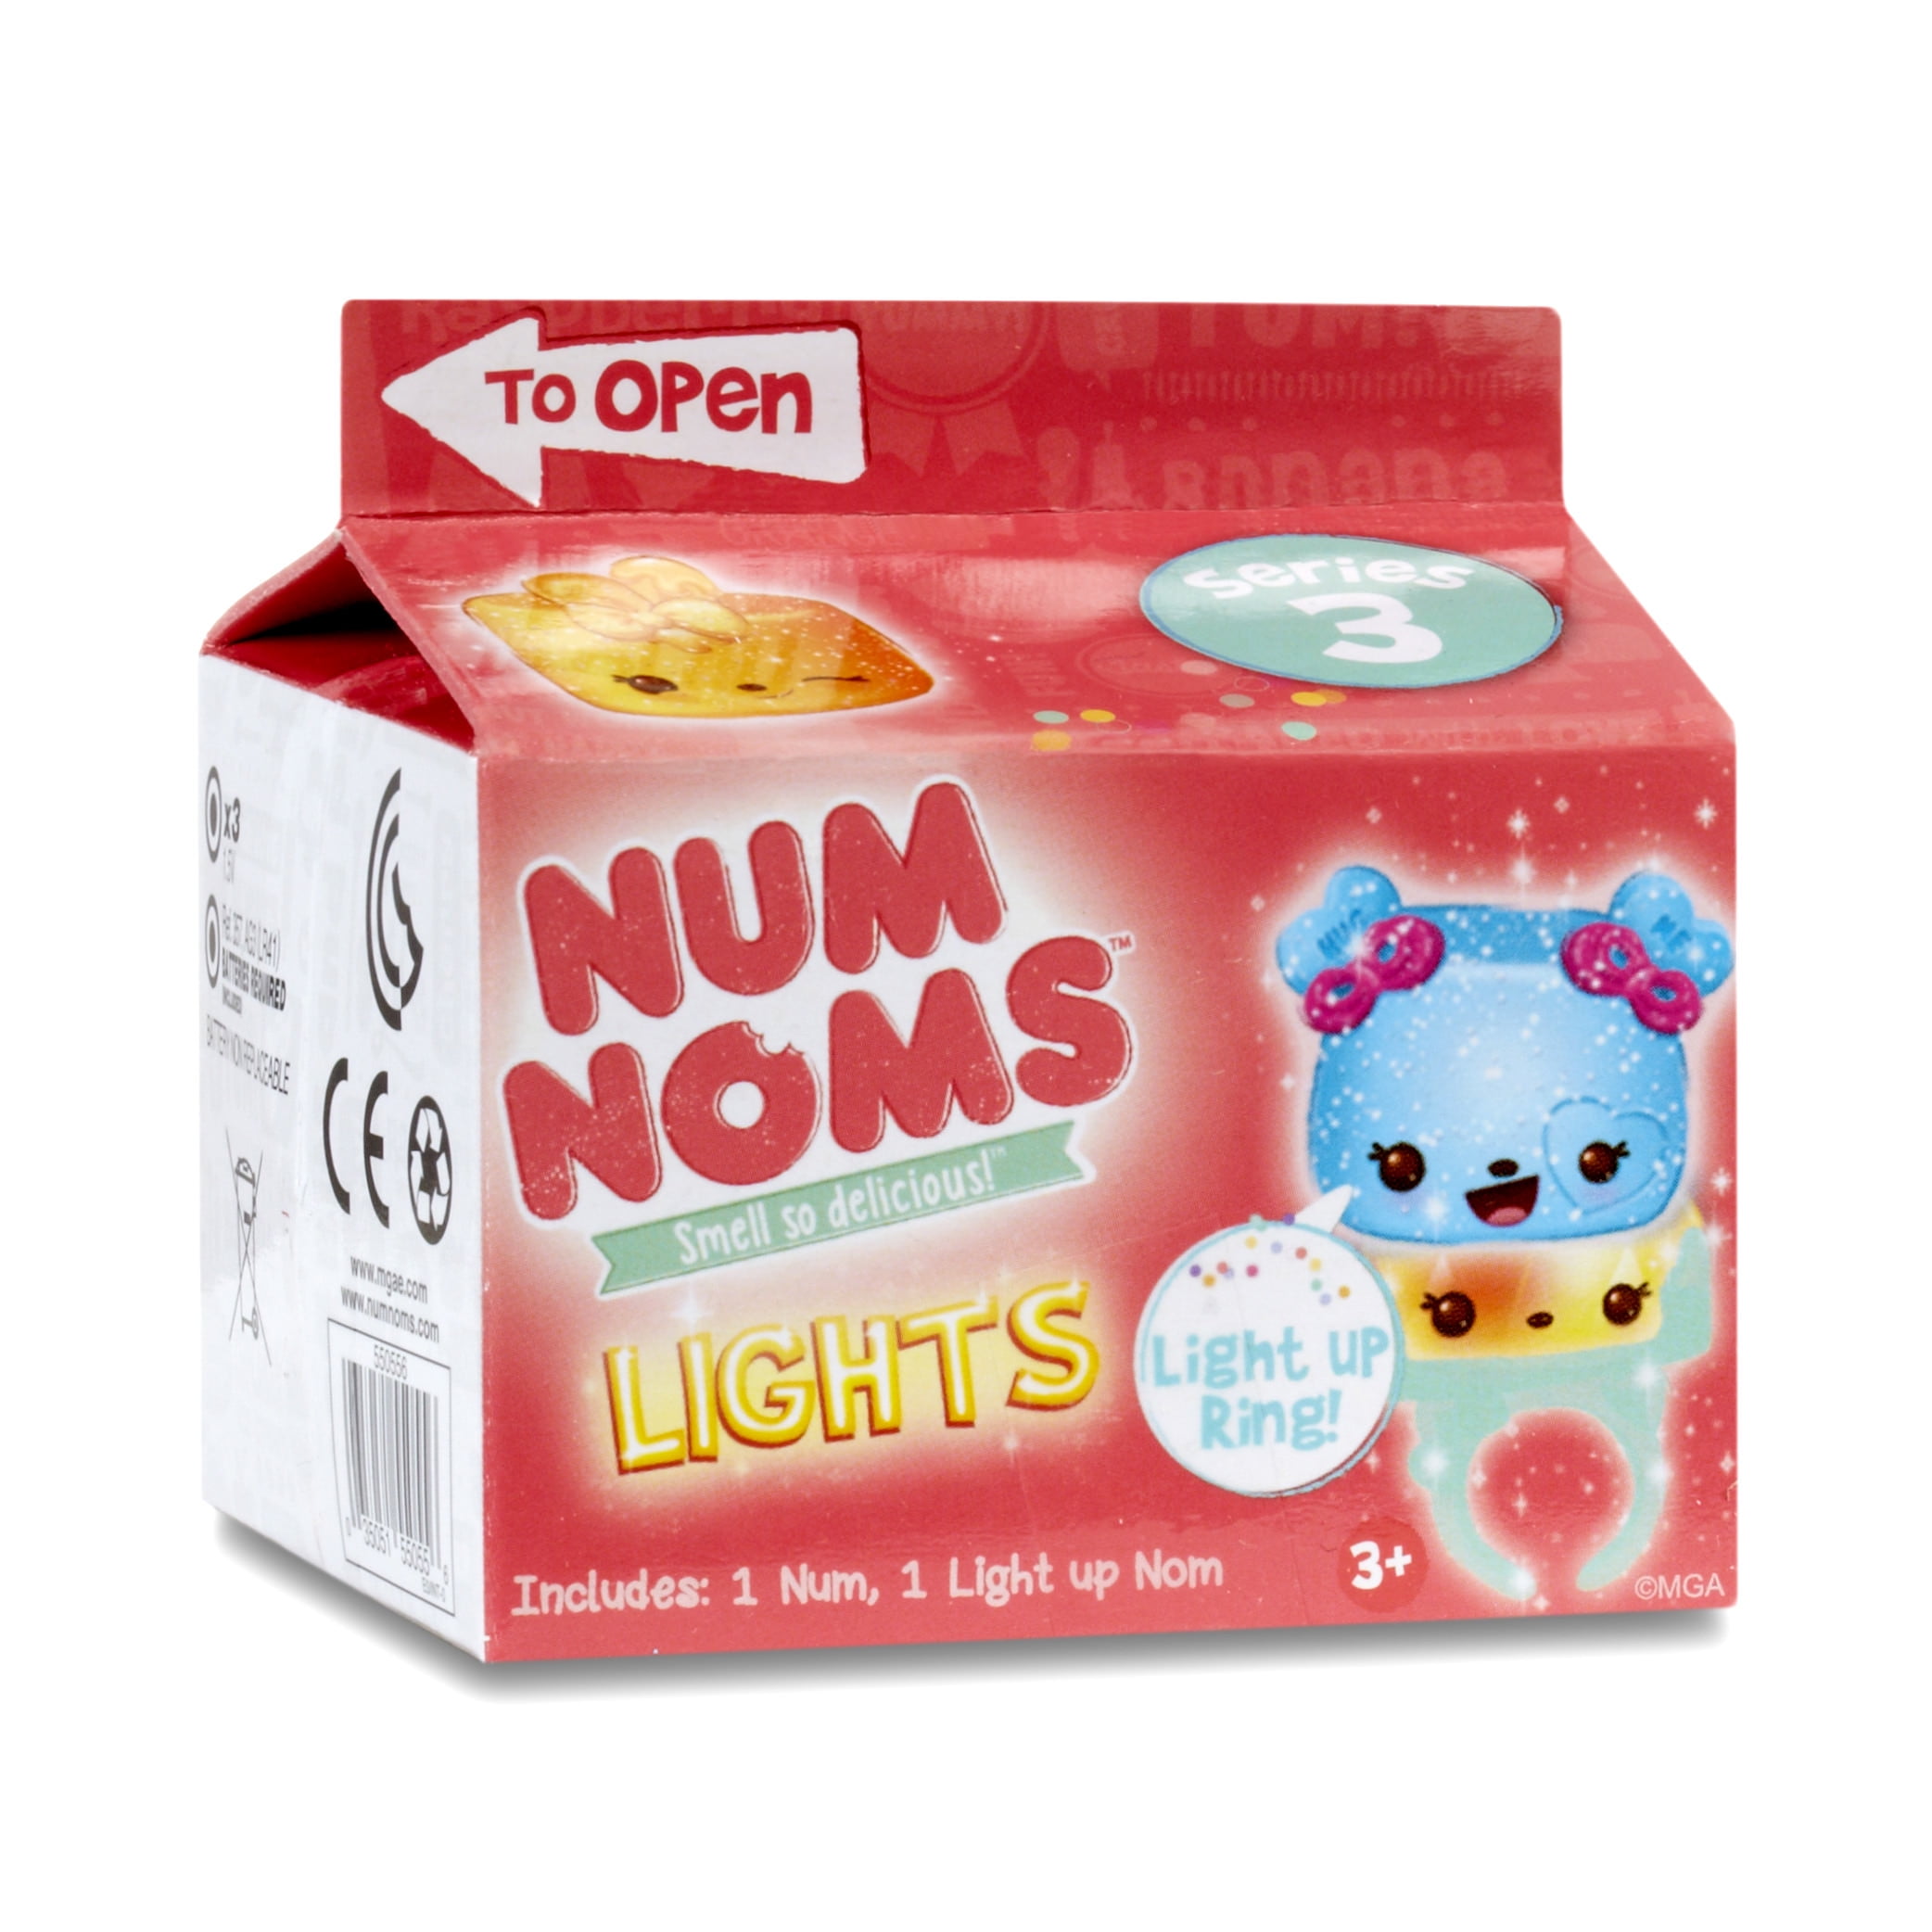 NUM NOMS Giant Mystery Packs Opening Series 3 Scented NUMS and Lip